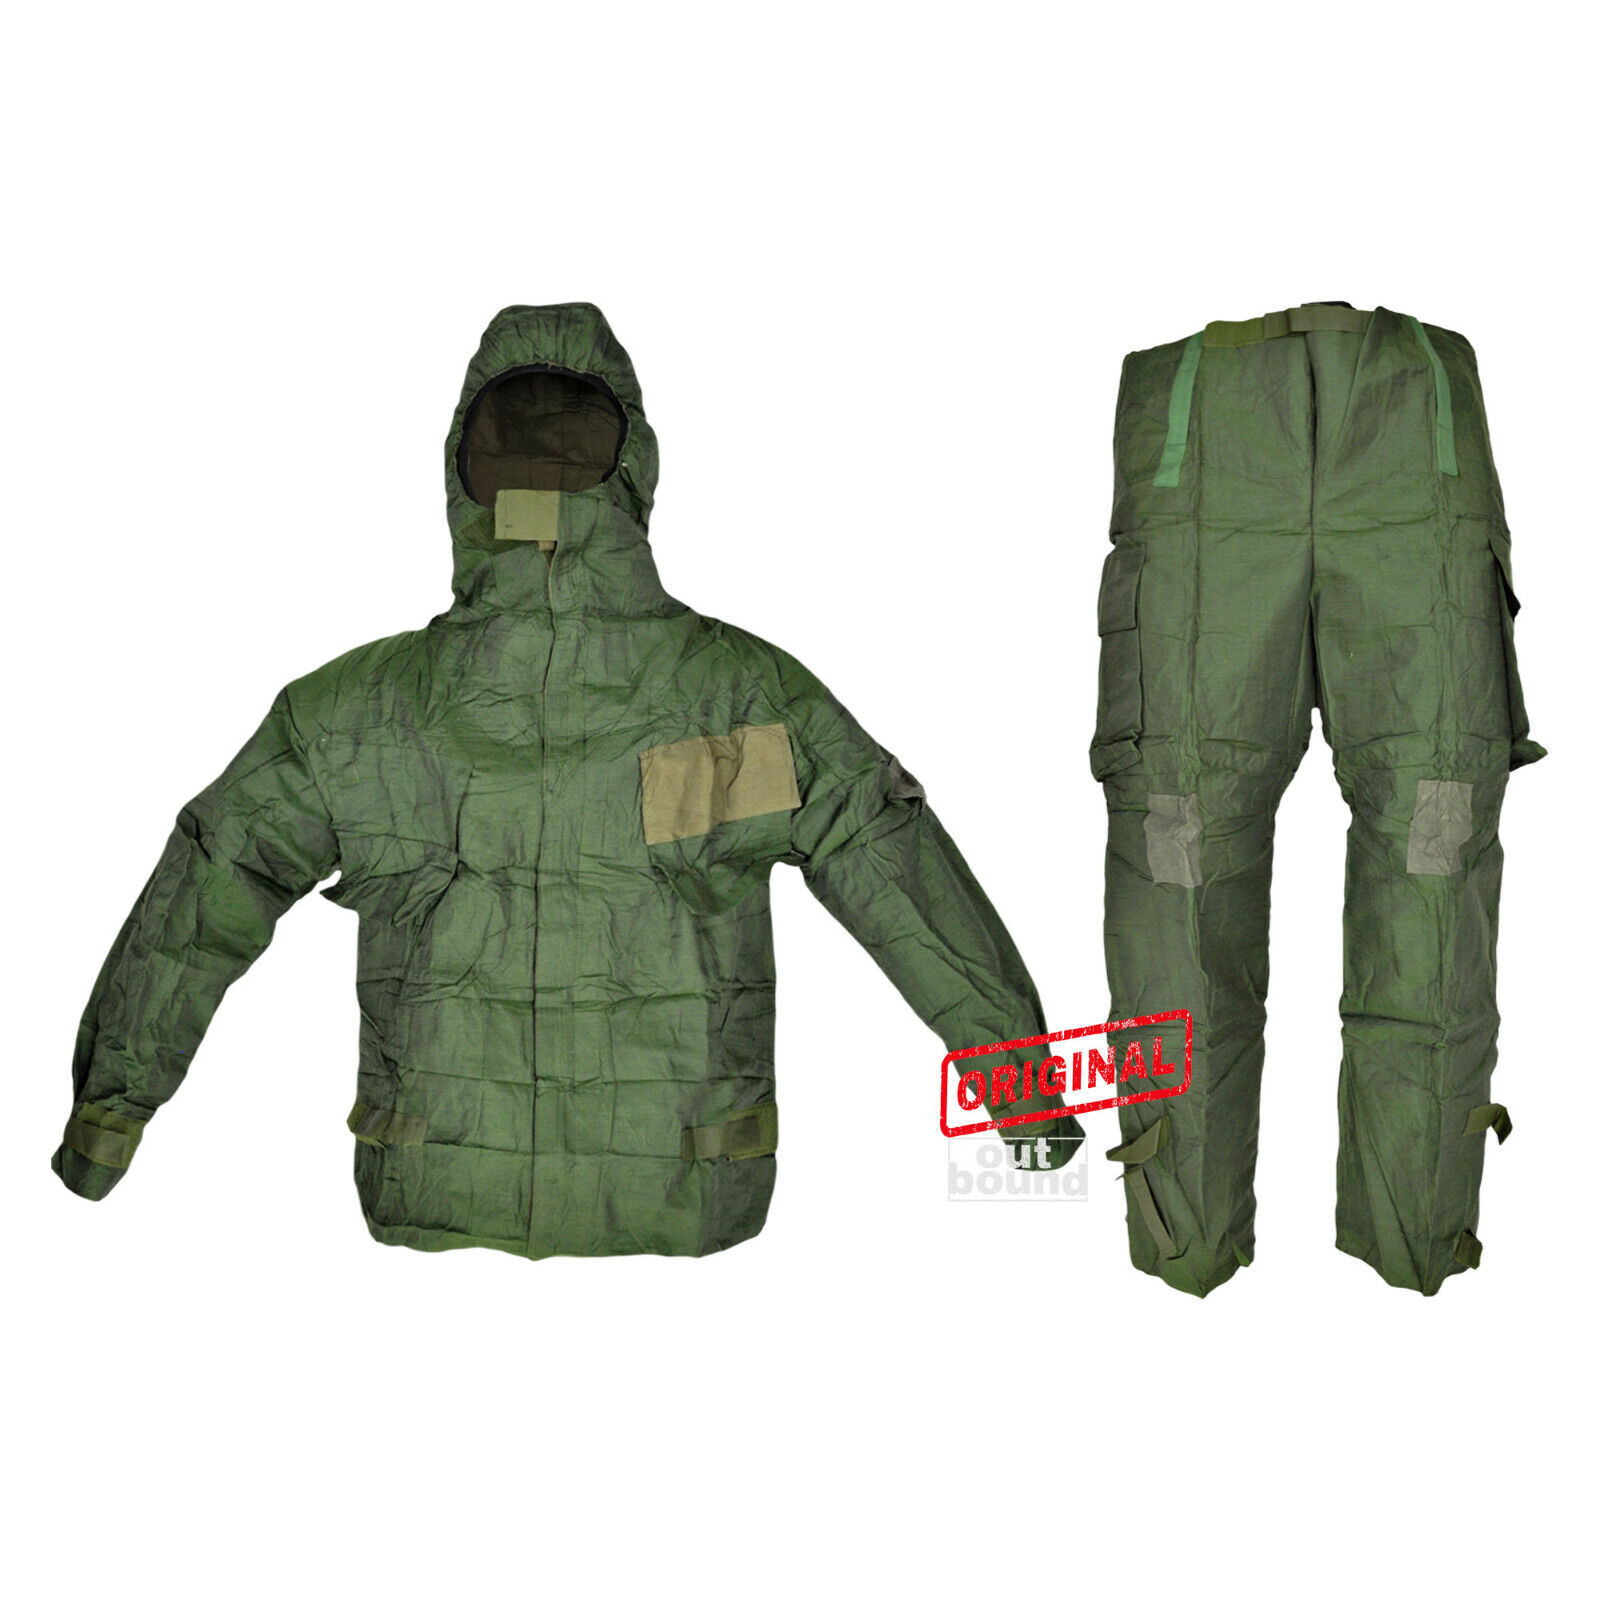 NBC Suit Original British Army Nuclear Biological Chemical Protection Jacket Set